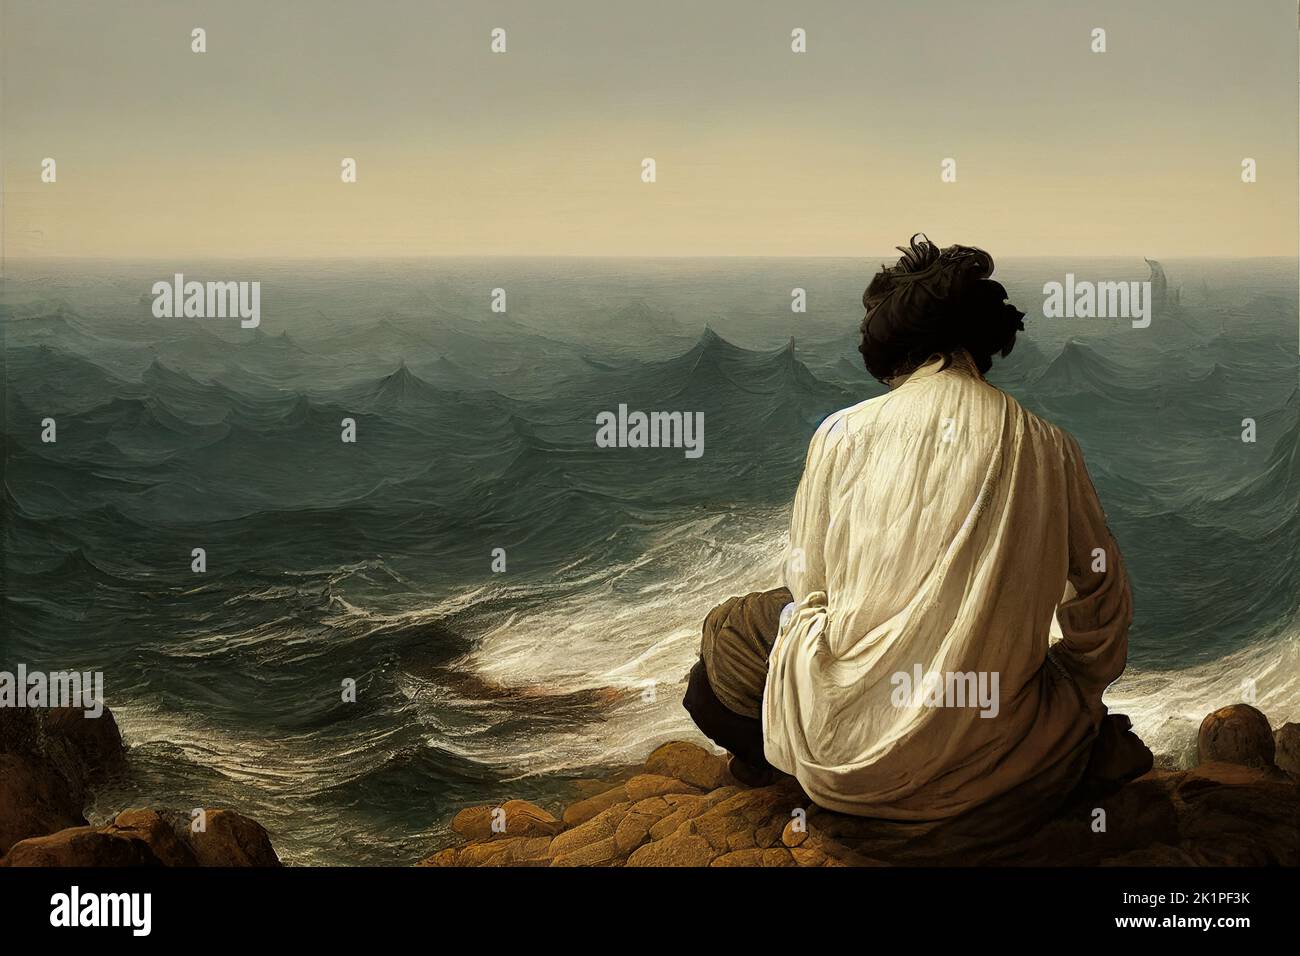 Migrant sitting on a rocky shore looks at the sea he crossed, digital illustration Stock Photo